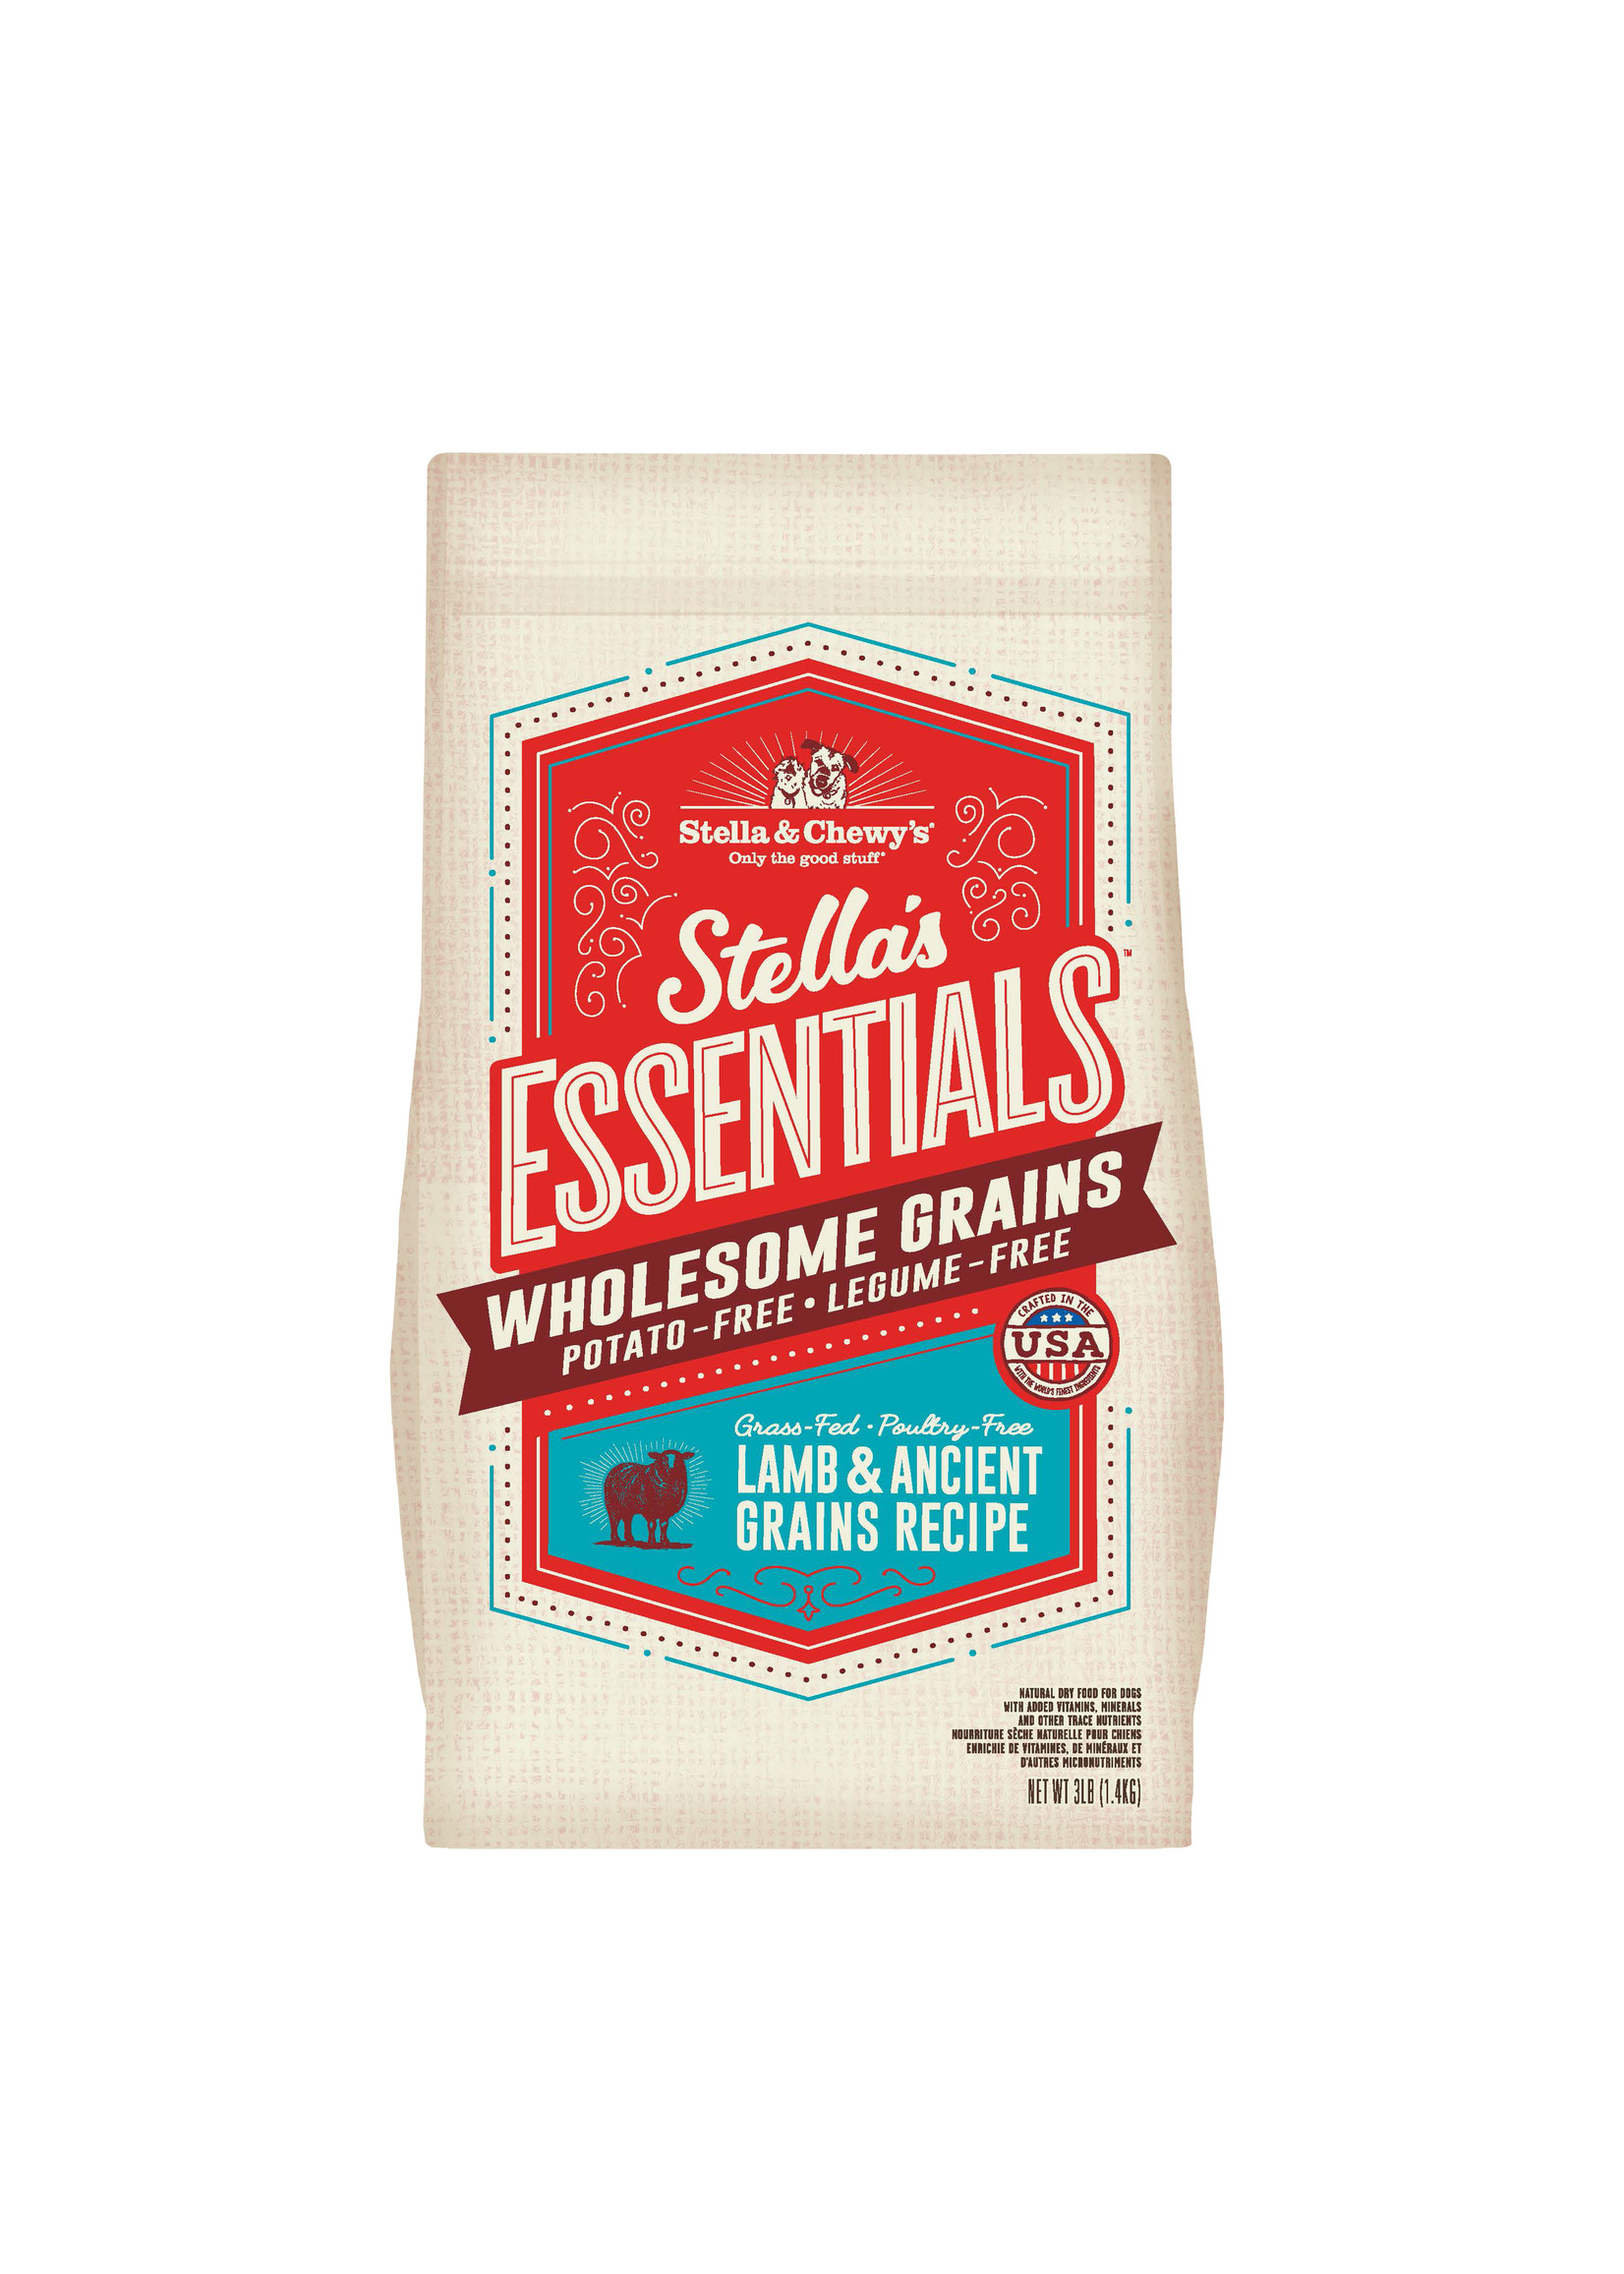 Stella & Chewy's Stella & Chewy's Lamb & Ancient Grains Essentials